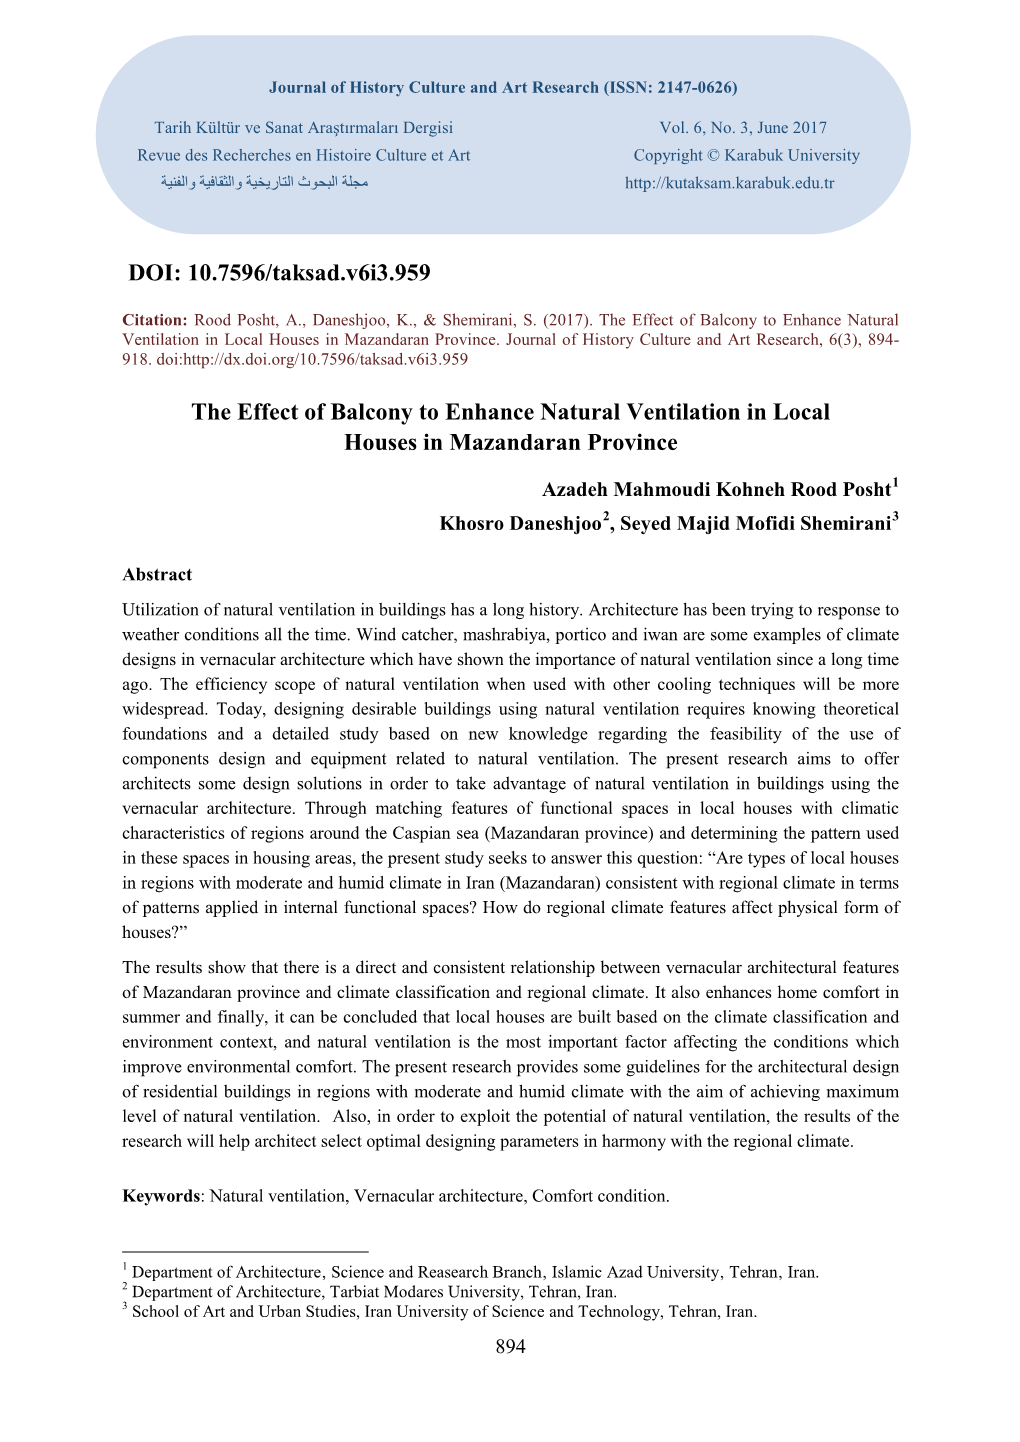 The Effect of Balcony to Enhance Natural Ventilation in Local Houses in Mazandaran Province